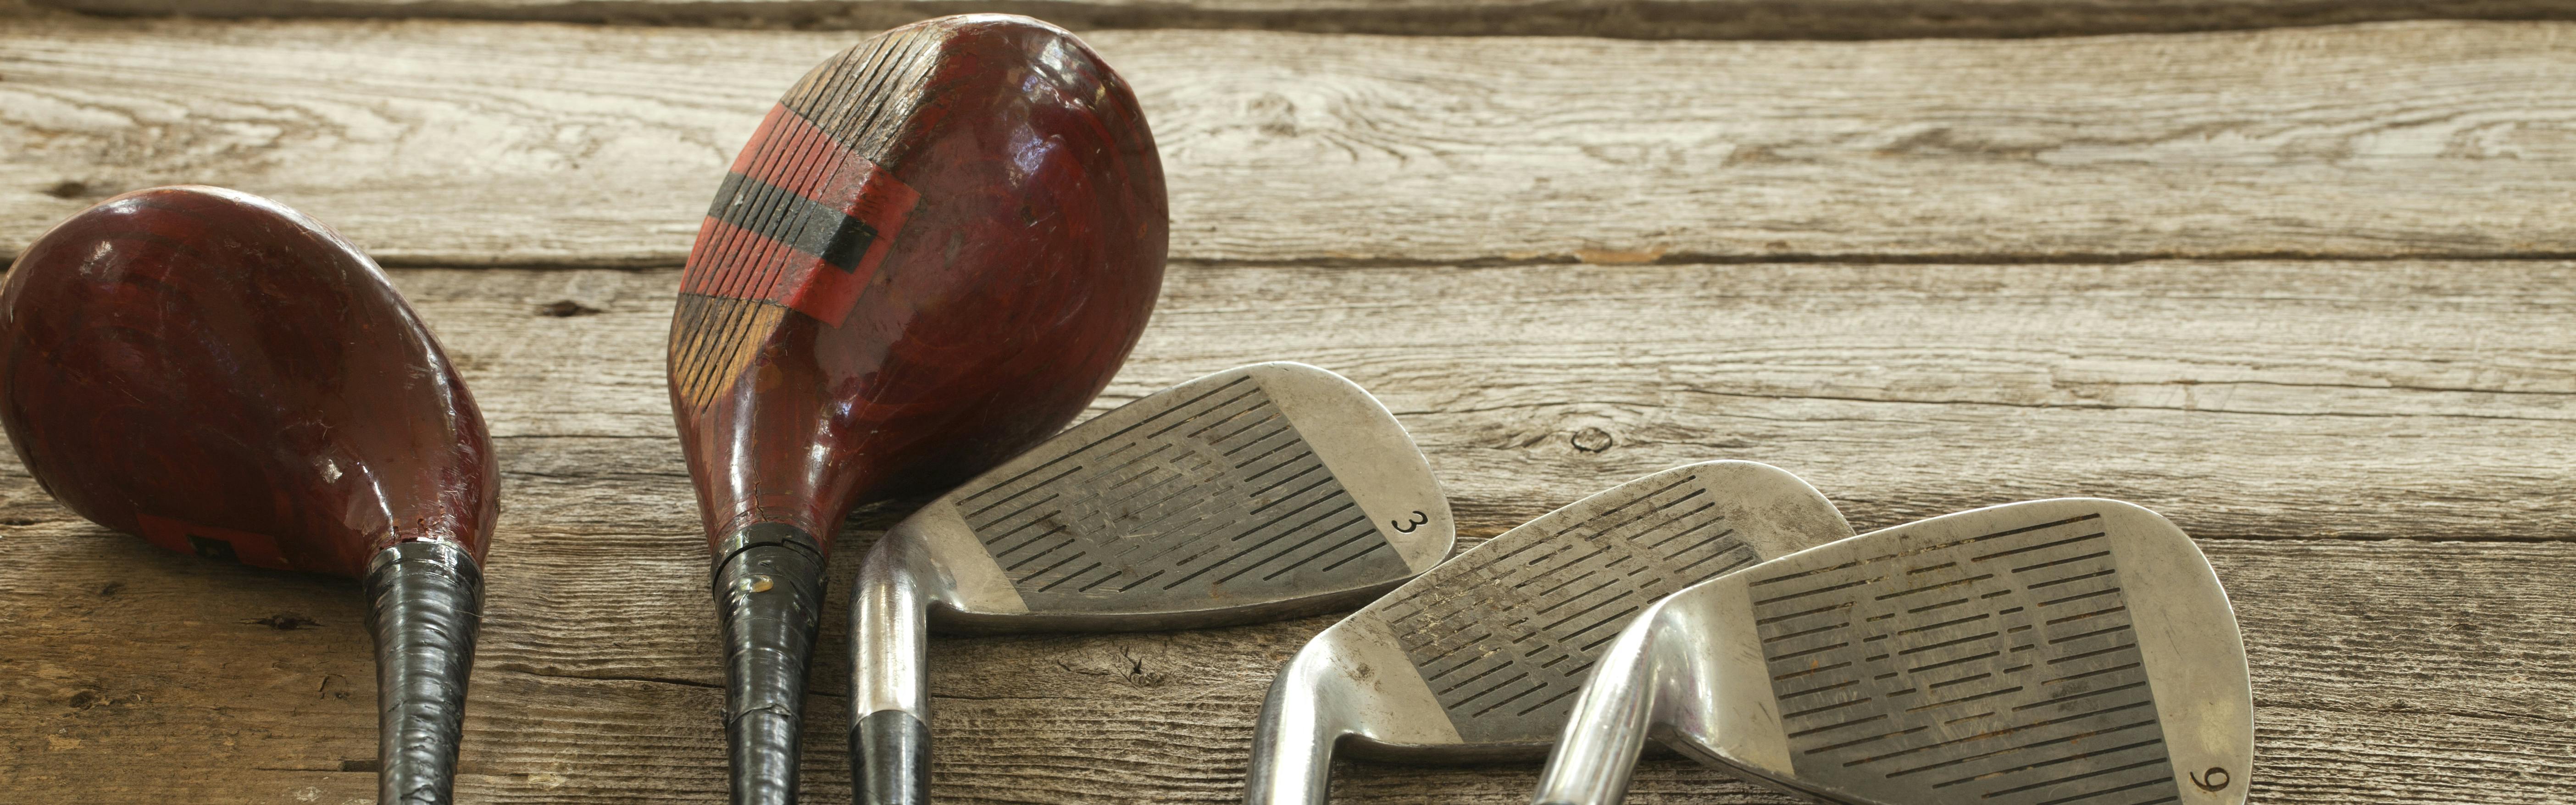 Swing in Style: A Guide to Painting Your Golf Clubs Like a Pro - Champ Golf